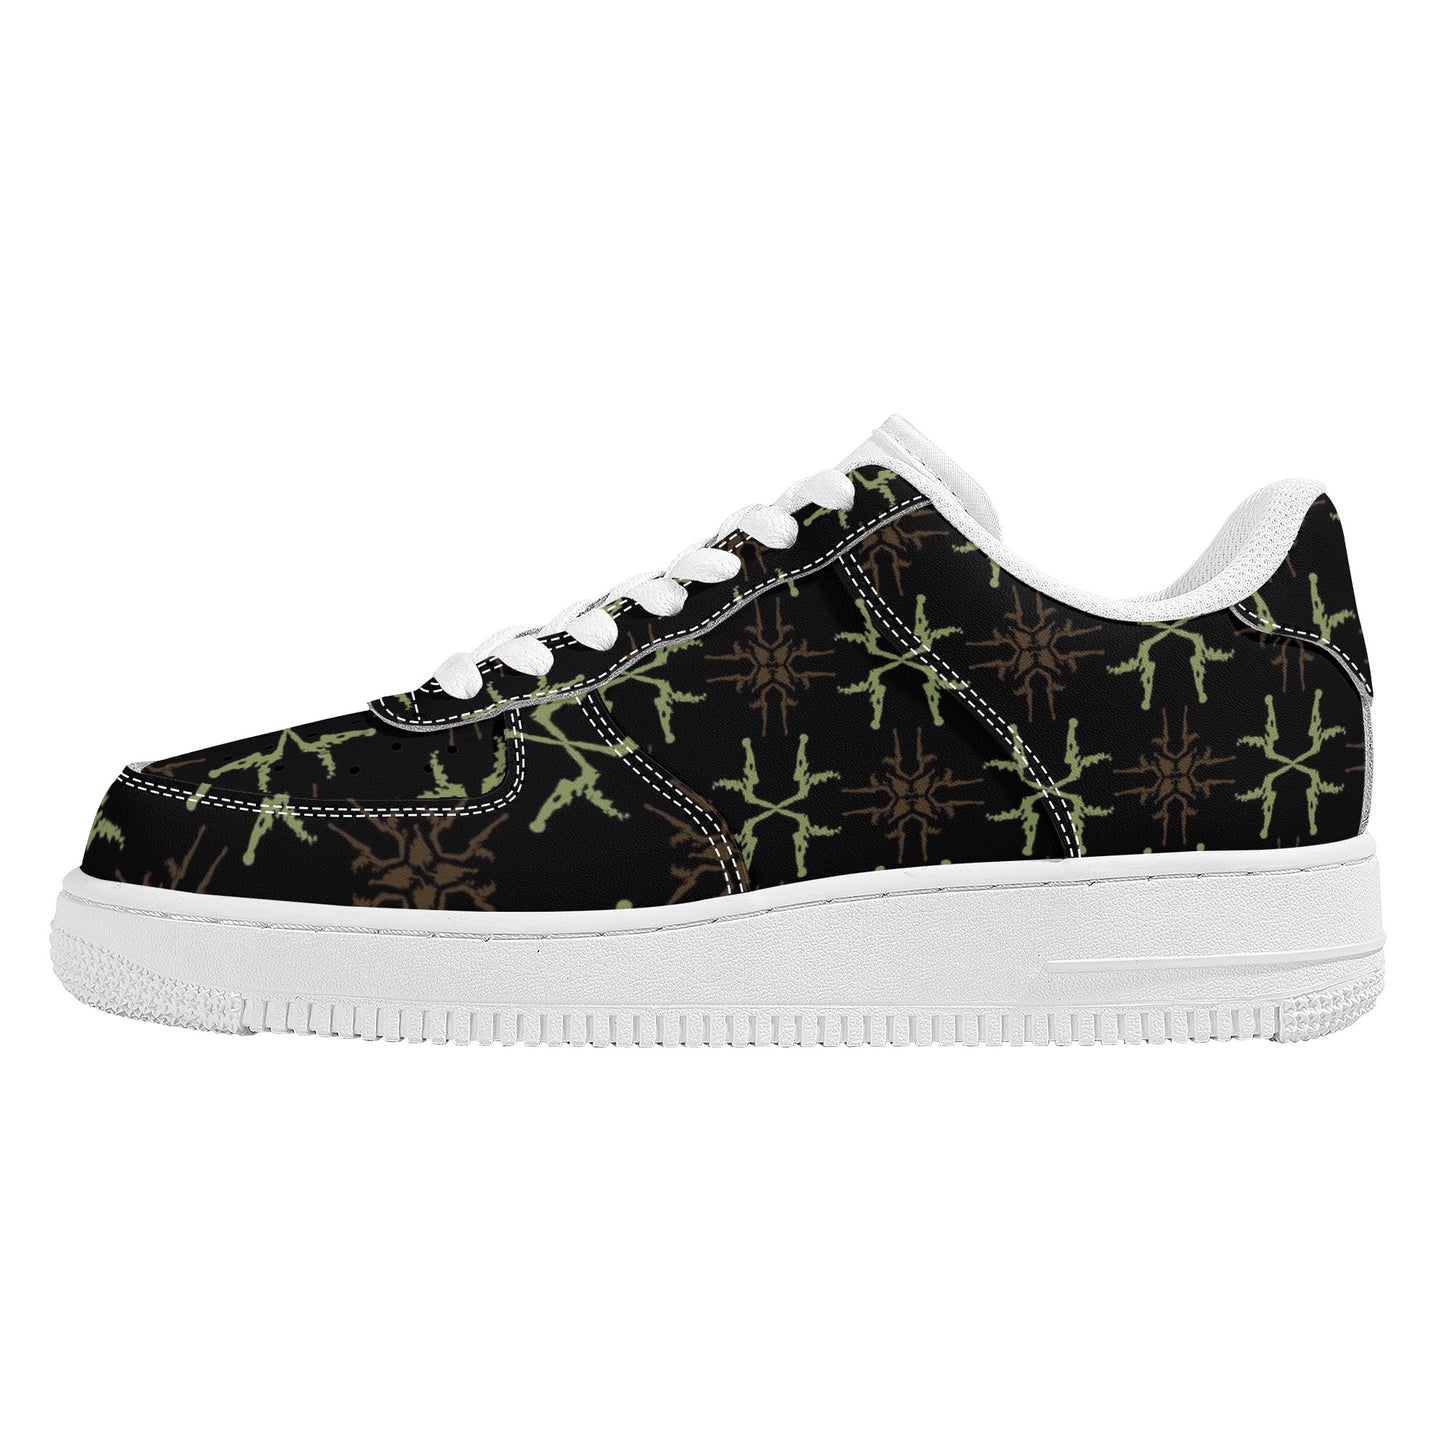 Designer Low Top Sneakers AirZ -X2 Colloid Colors 